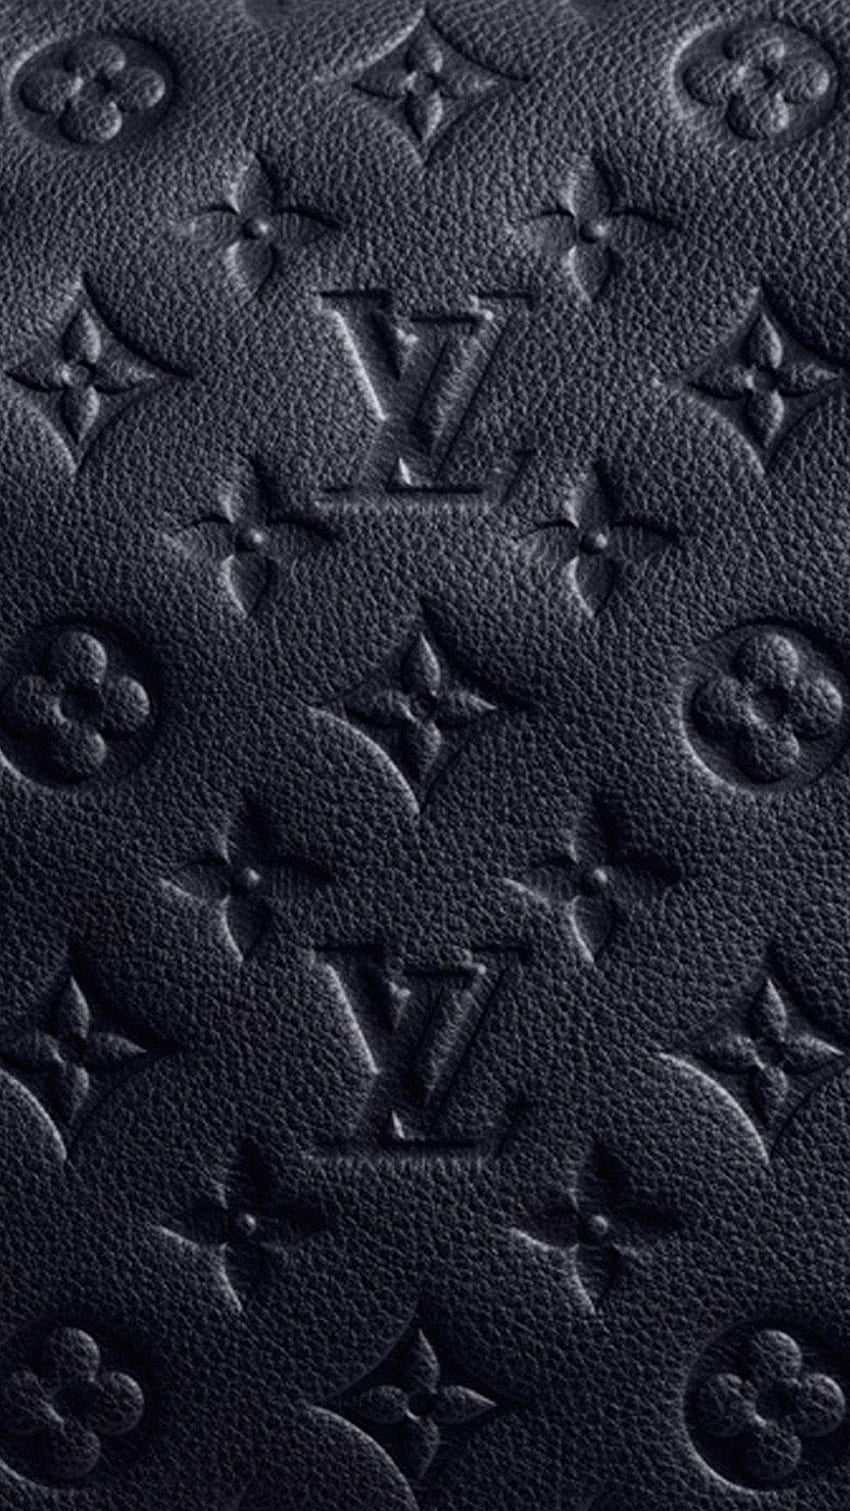 HD louis vuitton black and white wallpapers